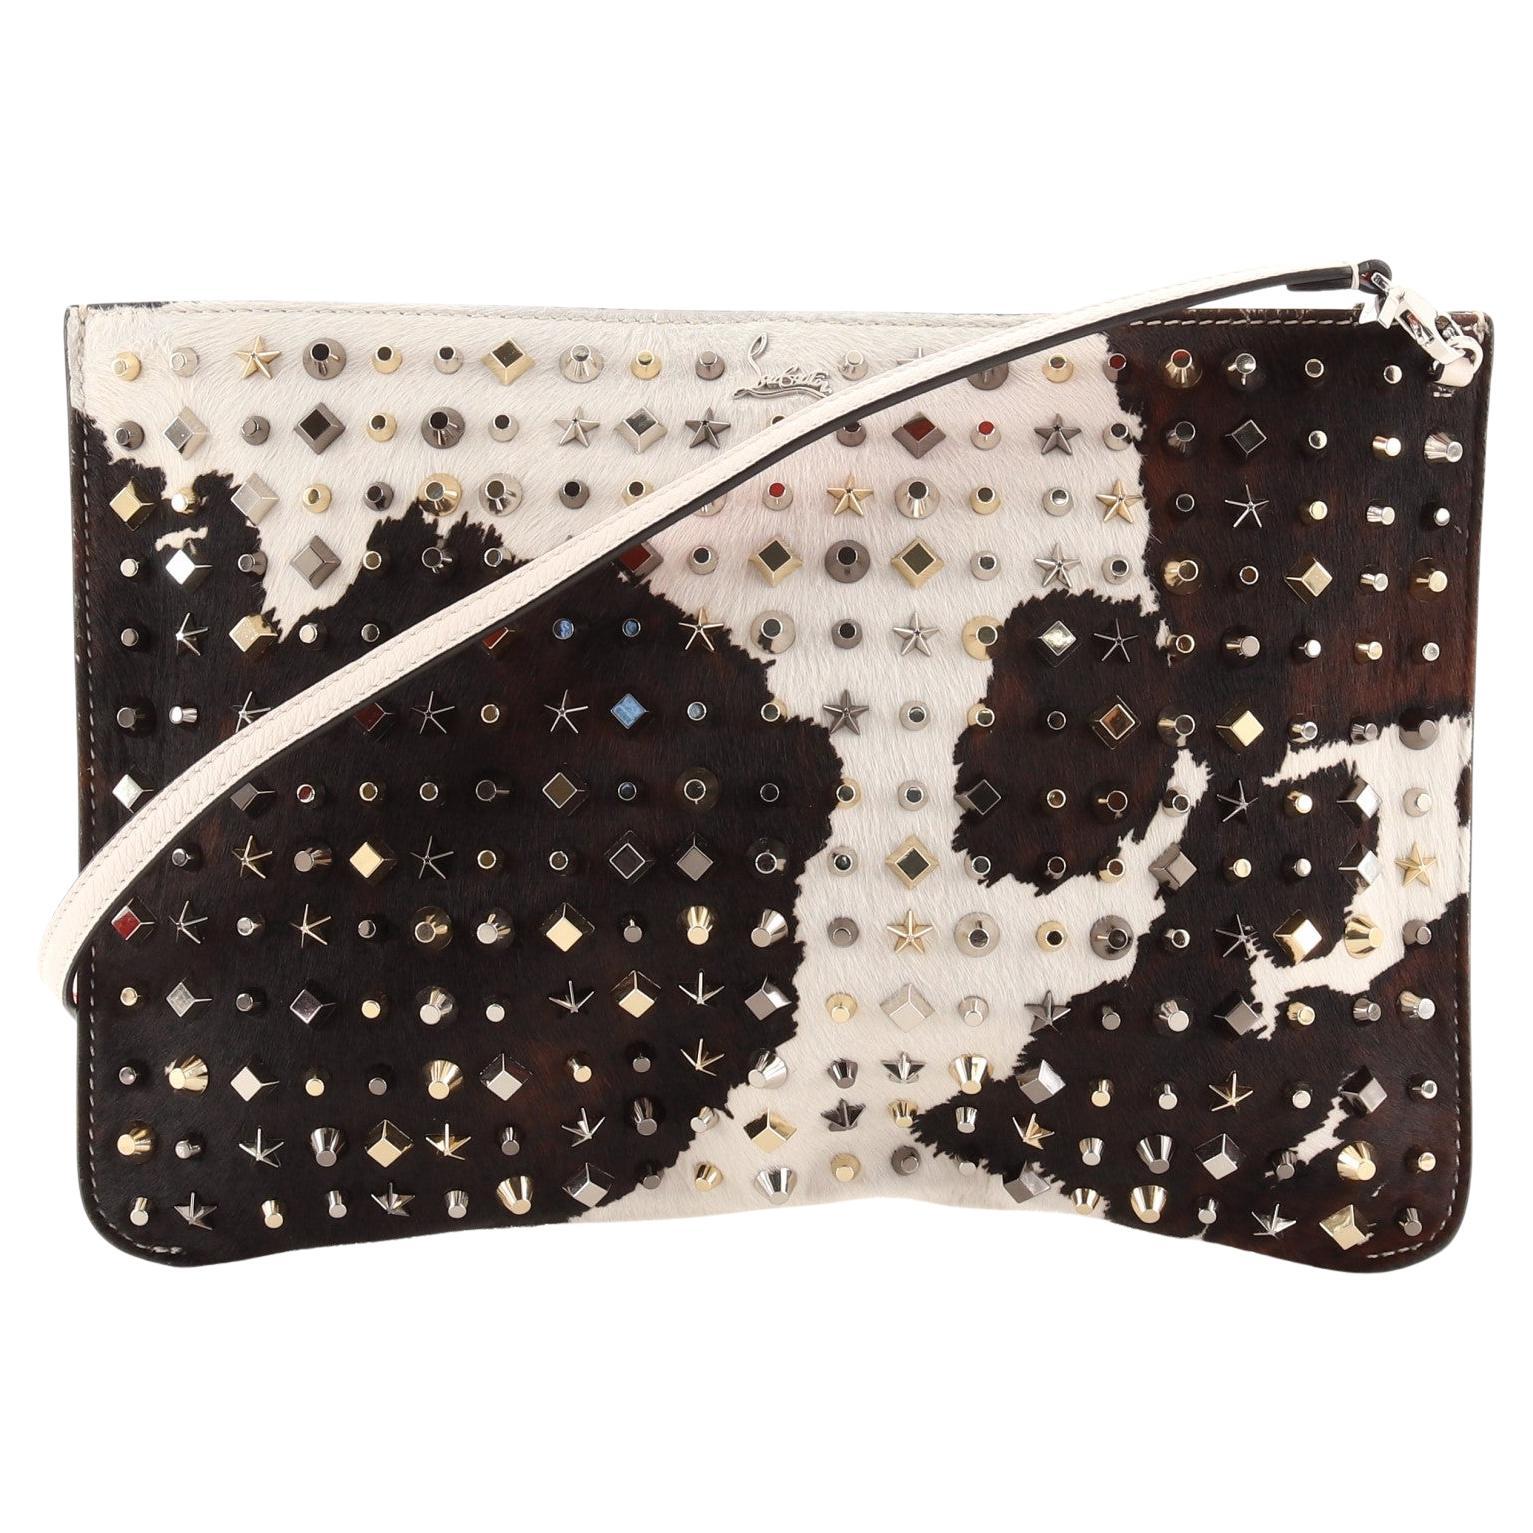 Christian Louboutin Loubiposh Clutch Printed Spiked Patent At 1stdibs 